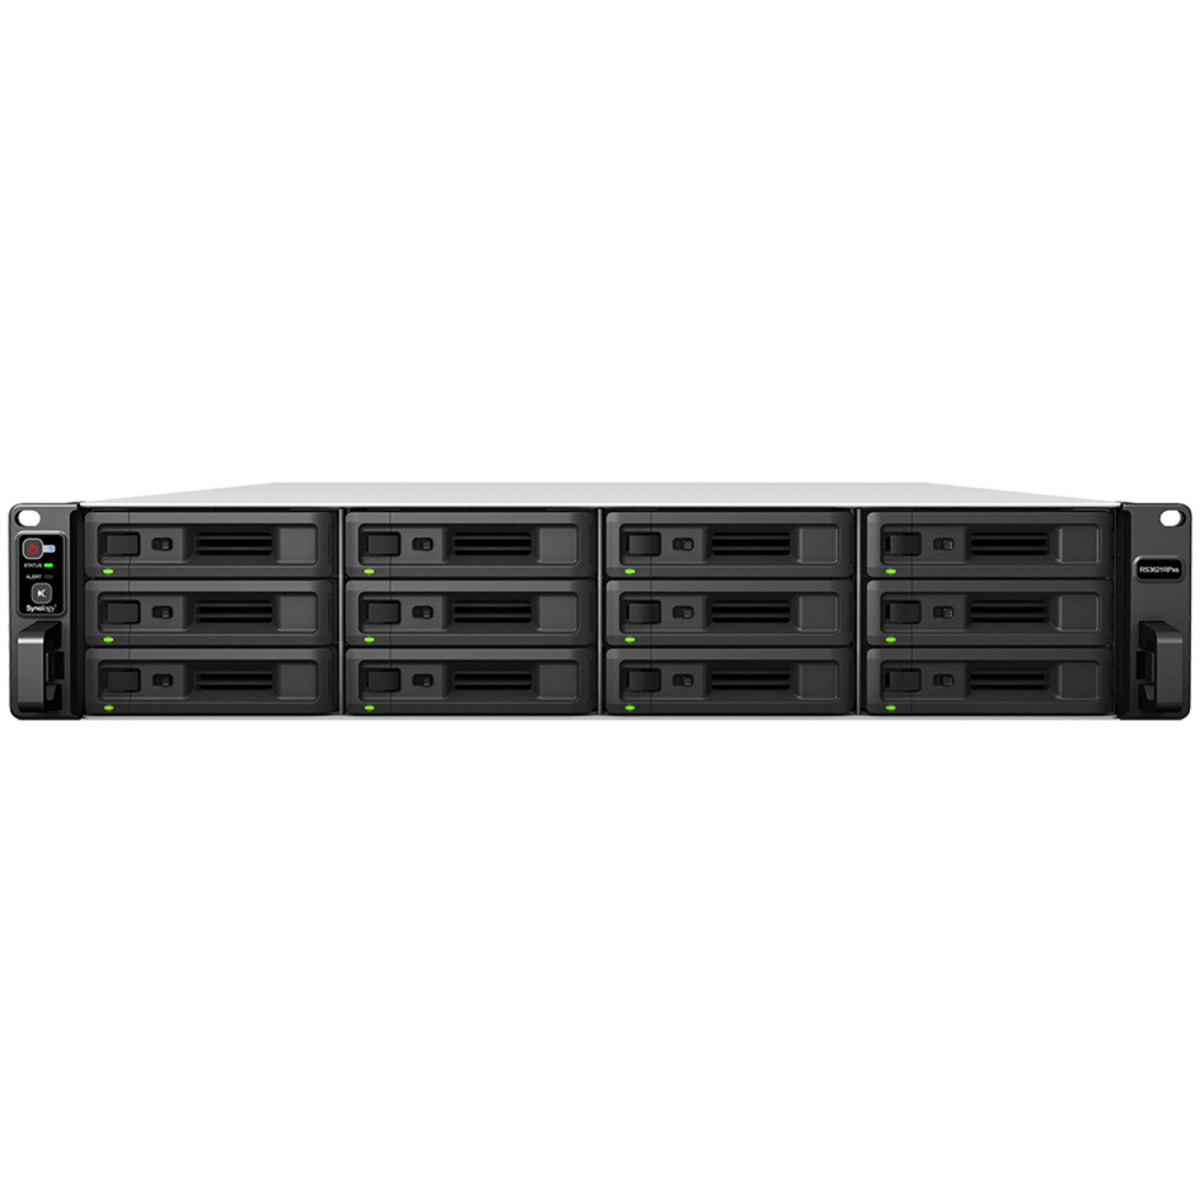 buy $4856 Synology RackStation RS3621RPxs 24tb RackMount NAS - Network Attached Storage Device 12x2000gb Seagate BarraCuda ST2000DM008 3.5 7200rpm SATA 6Gb/s HDD CONSUMER Class Drives Installed - Burn-In Tested - ON SALE - nas headquarters buy network attached storage server device das new raid-5 free shipping usa christmas new year holiday sale RackStation RS3621RPxs